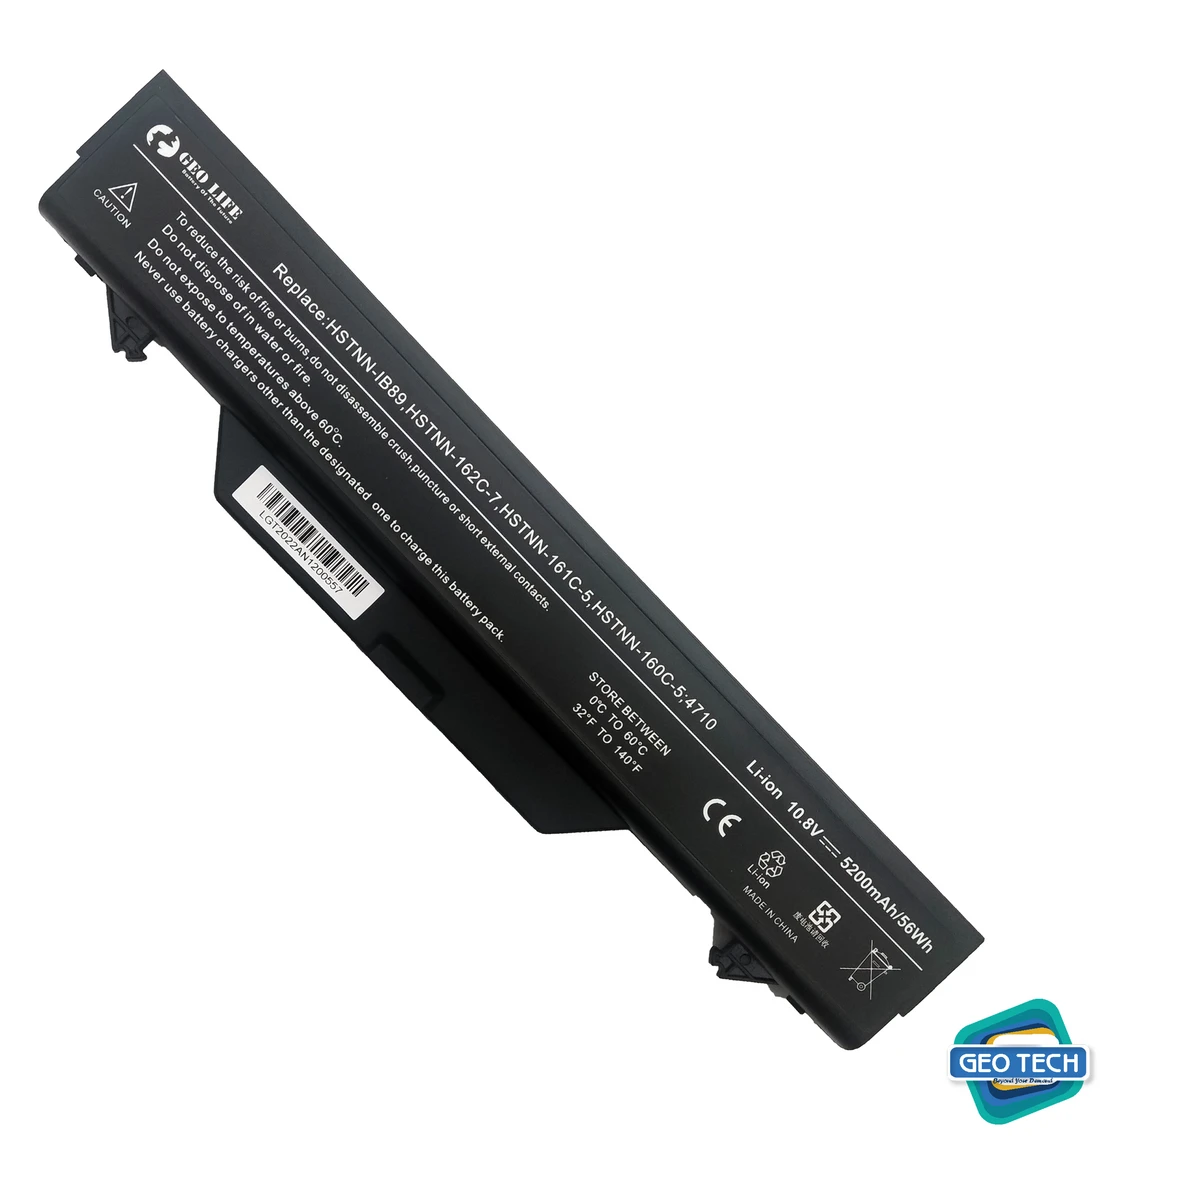 Laptop Battery For HP ProBook 4510s 4515s 4710s